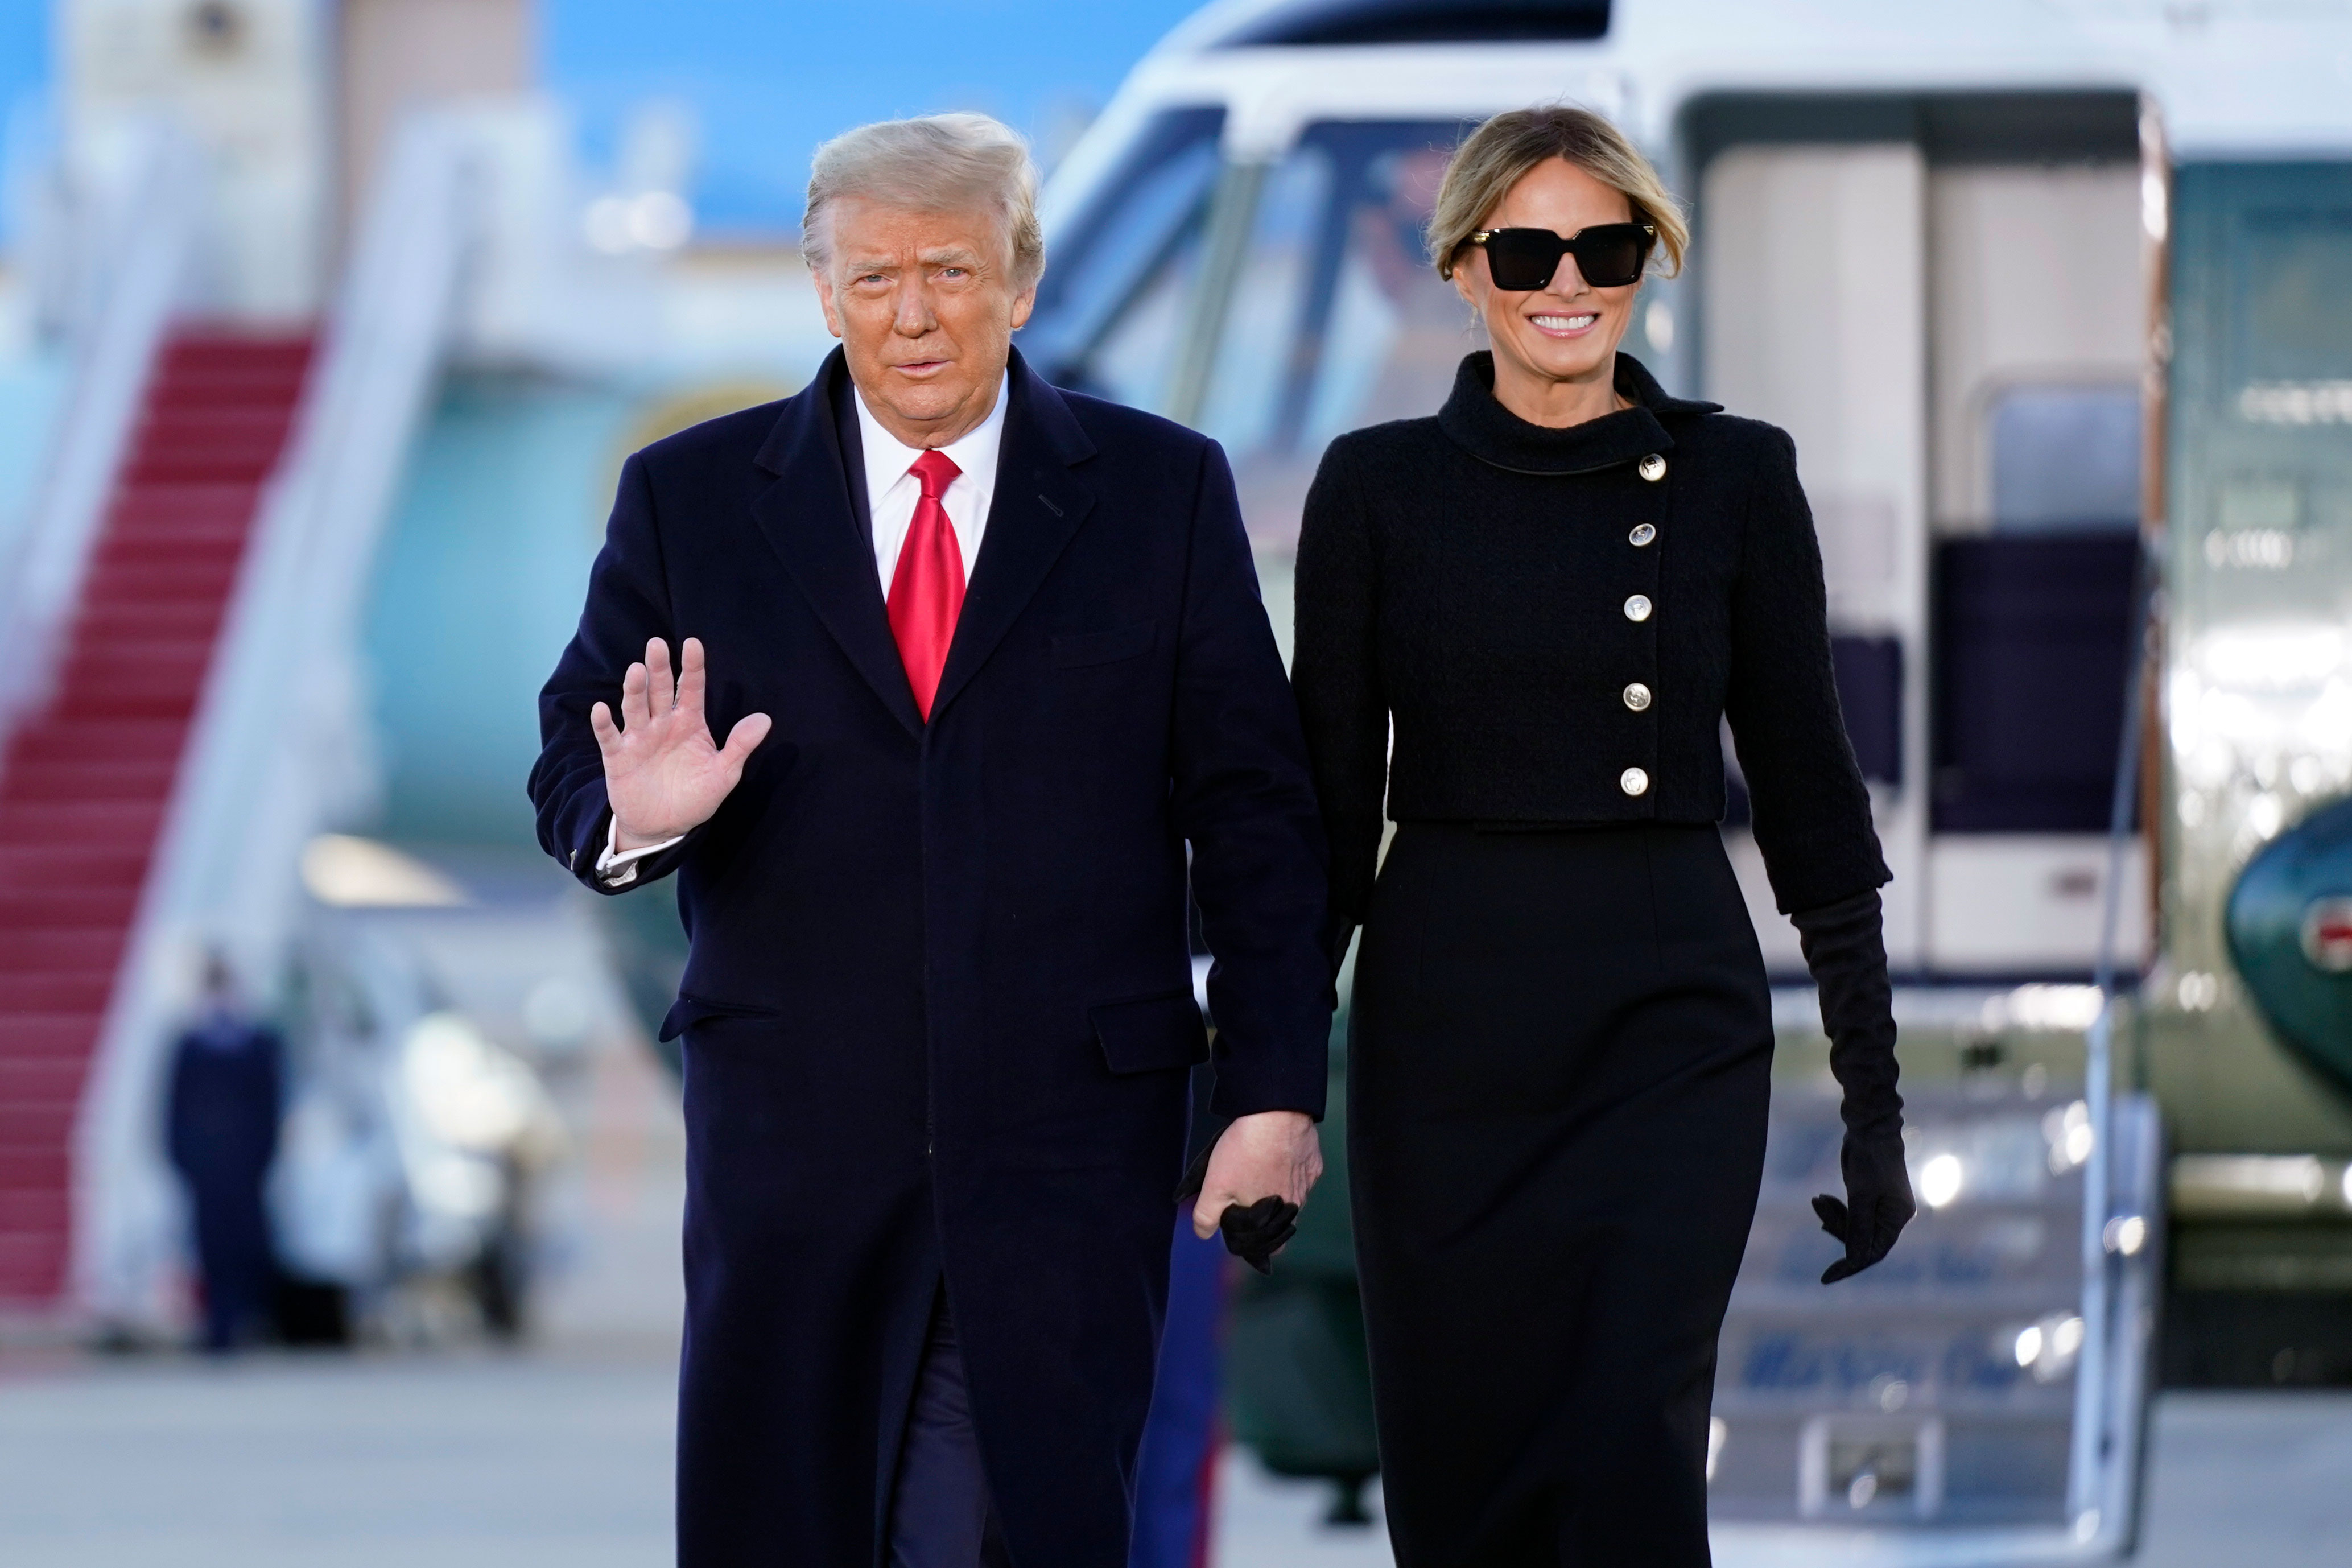 President Donald Trump and first lady Melania Trump arrive at Joint Base Andrews in Maryland on January 20.